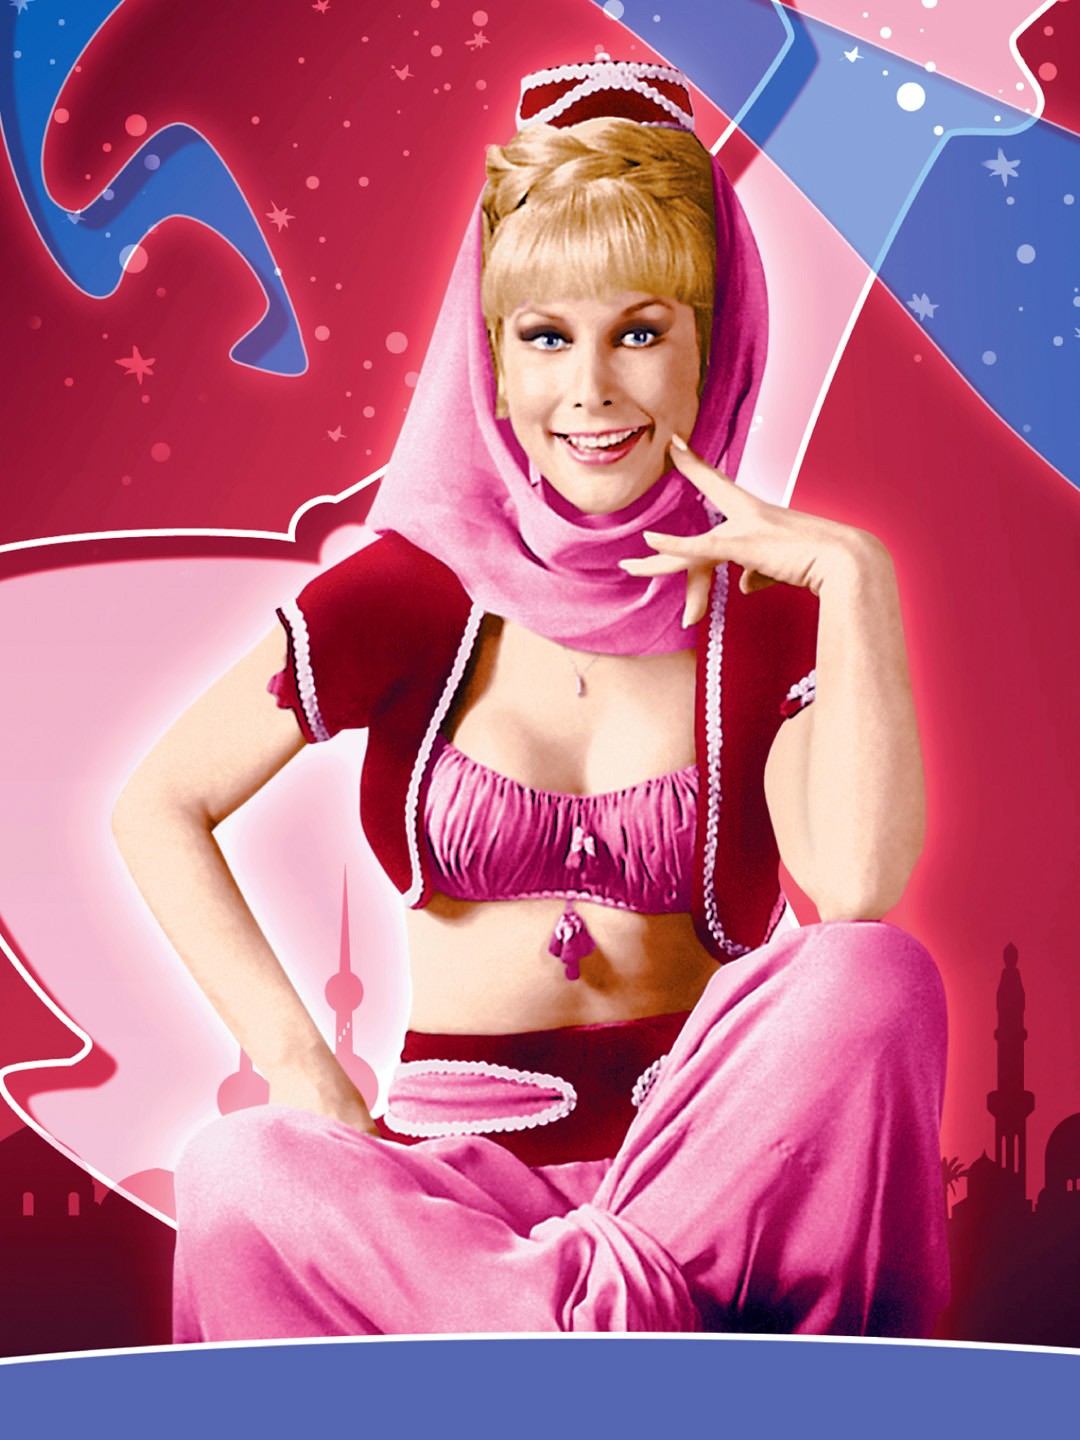 Pics of i dream of jeannie